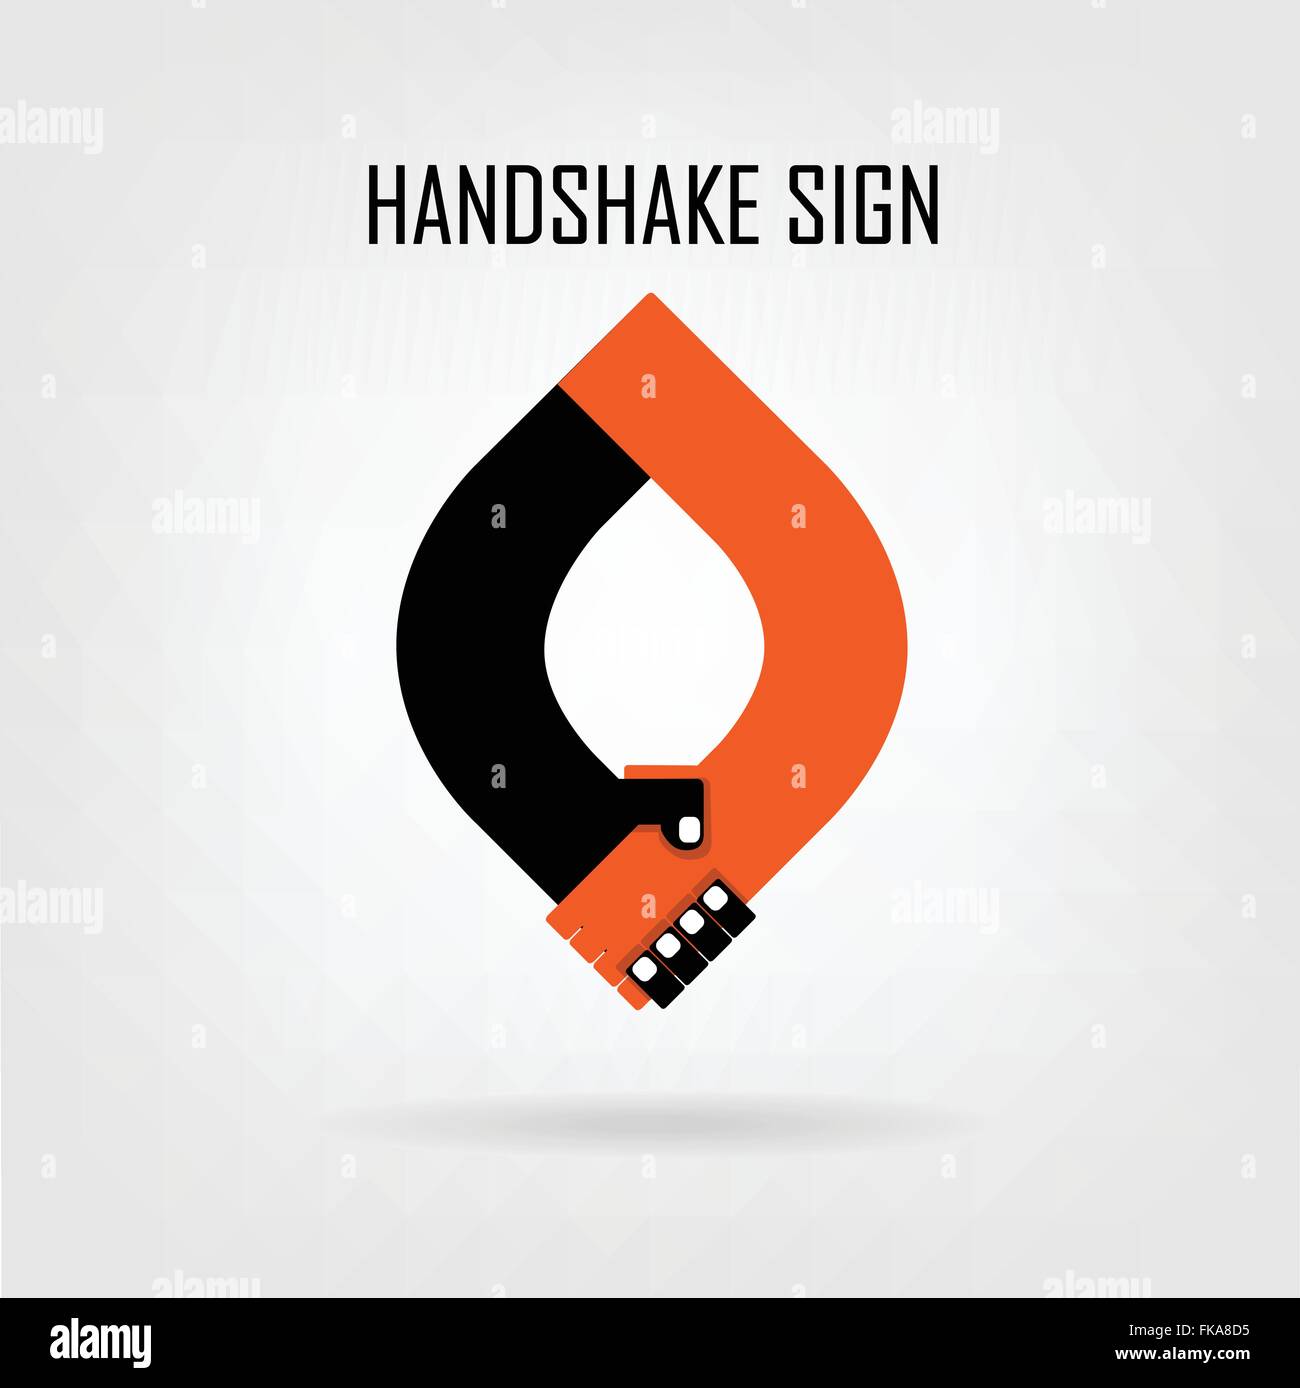 Handshake abstract sign vector design template. Business creative concept. Deal, contract, team, cooperation symbol icon Stock Vector